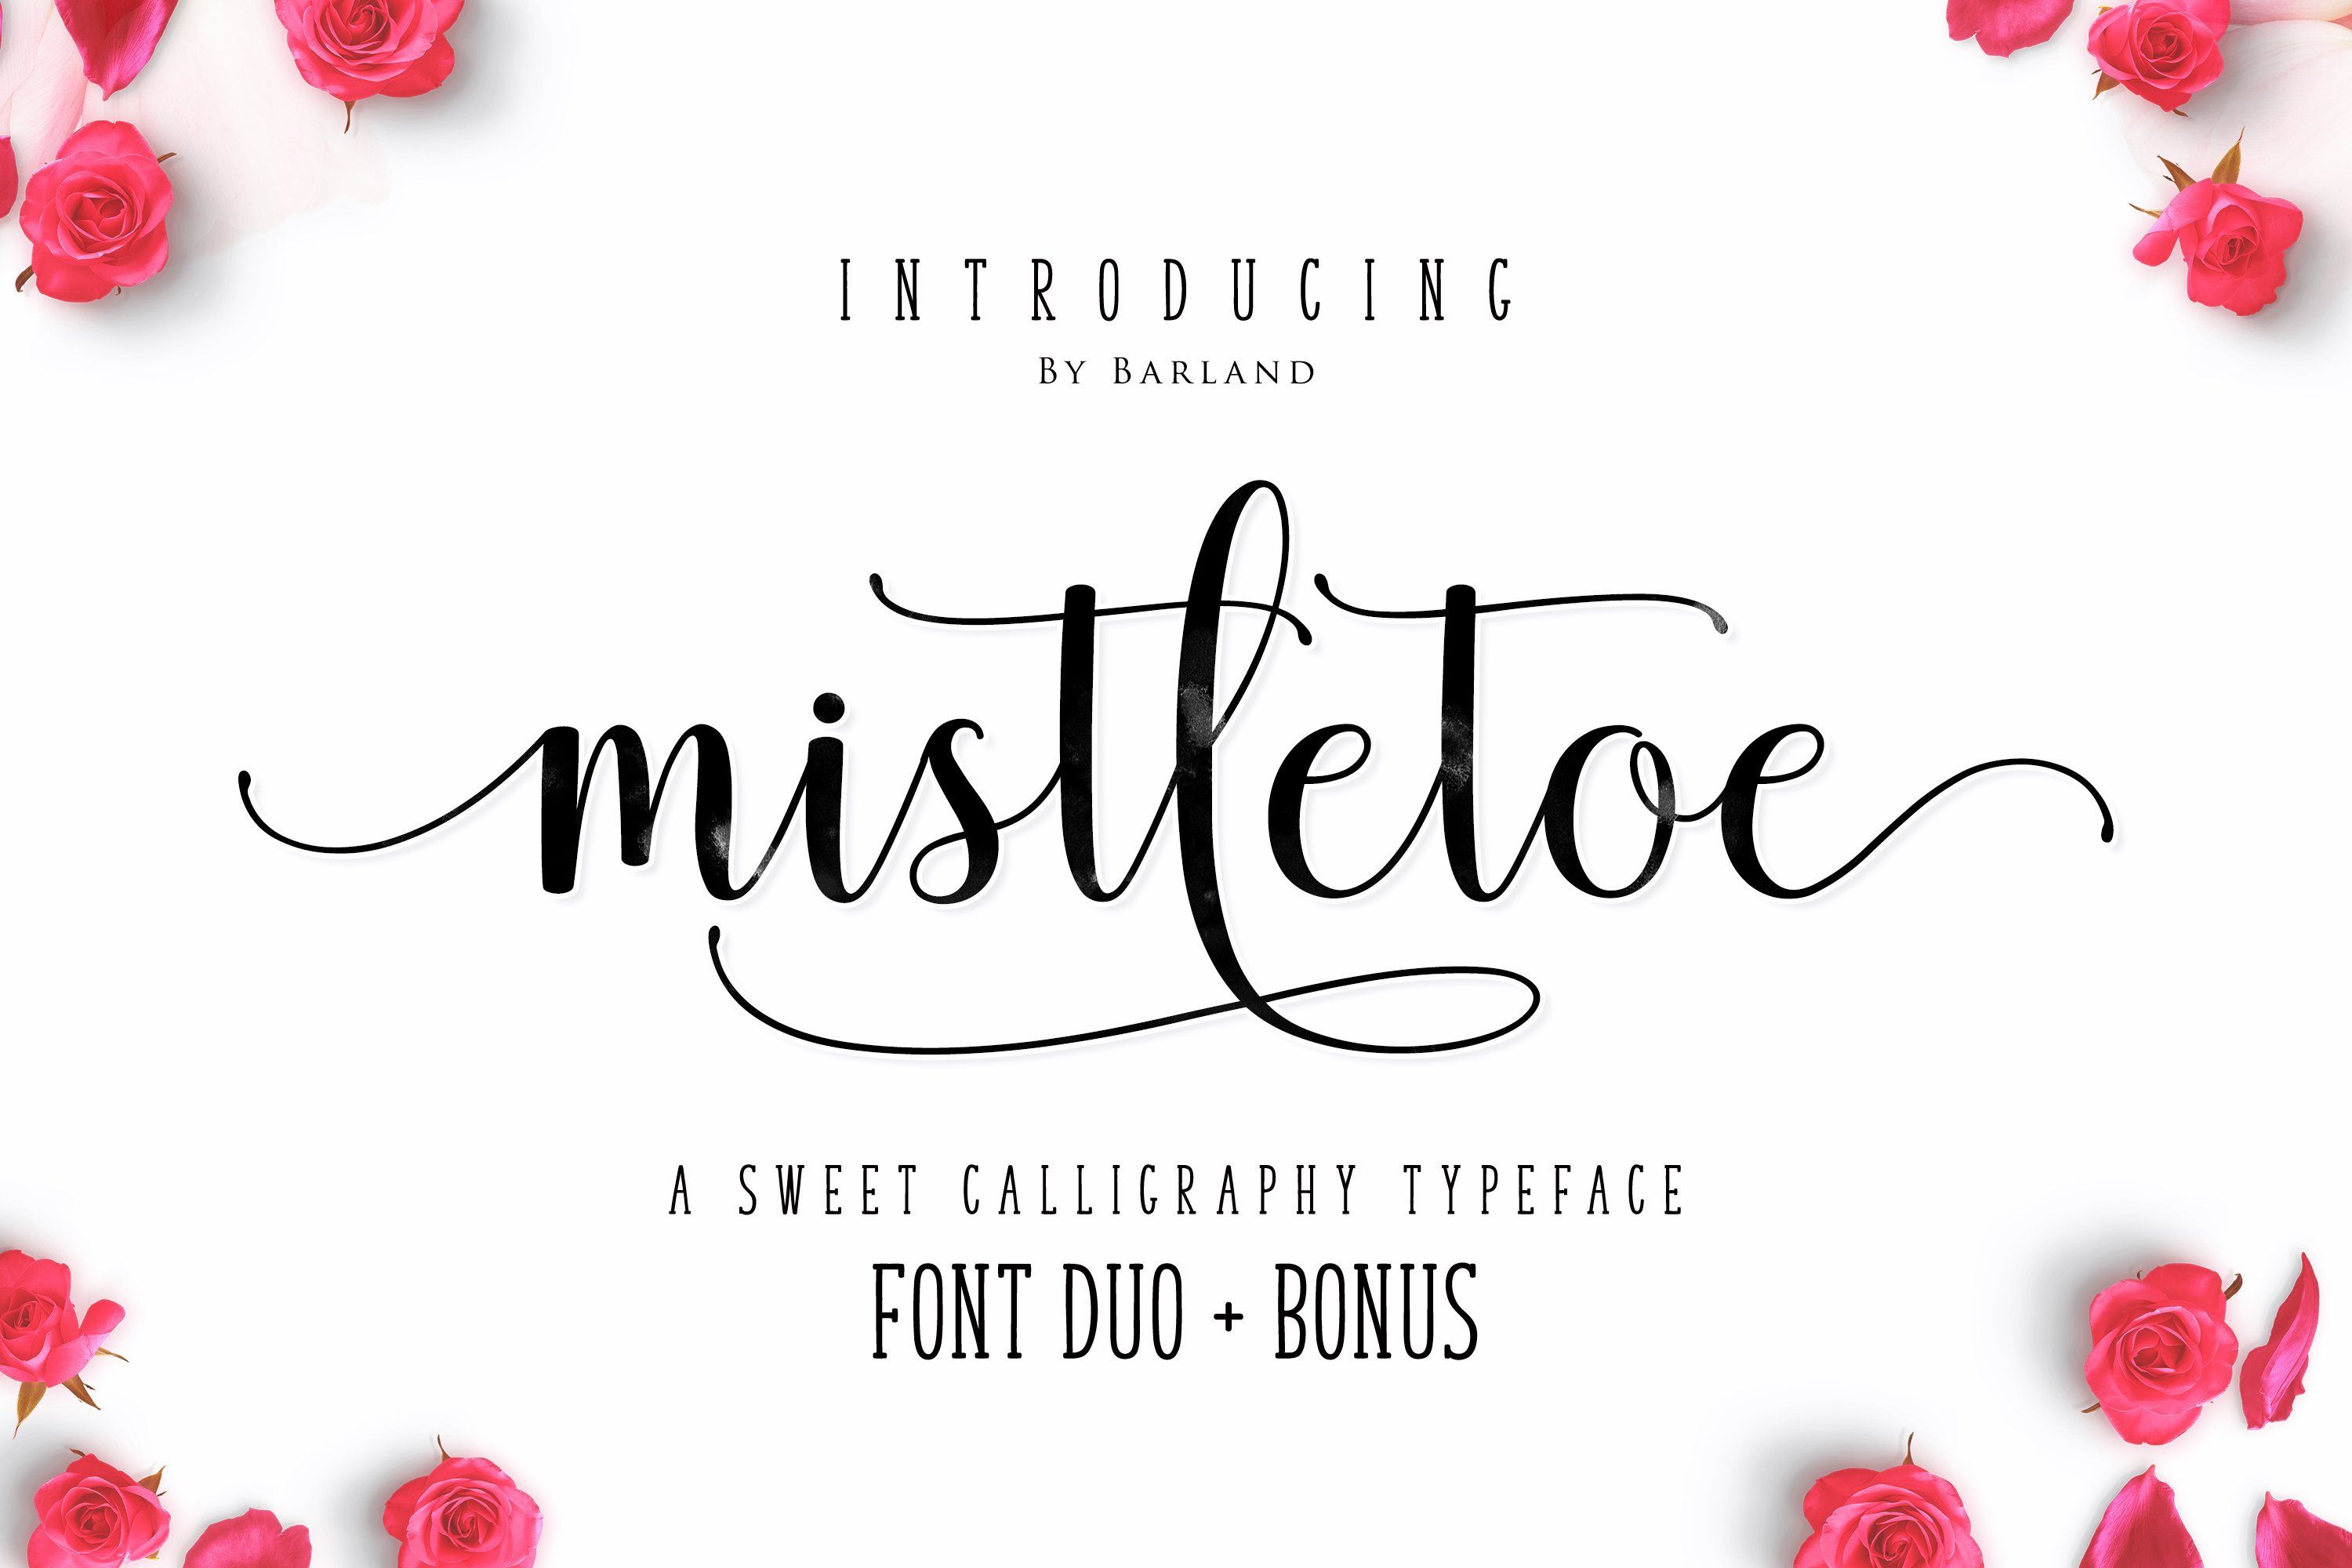 A ribbon typeface with a subtle touch.